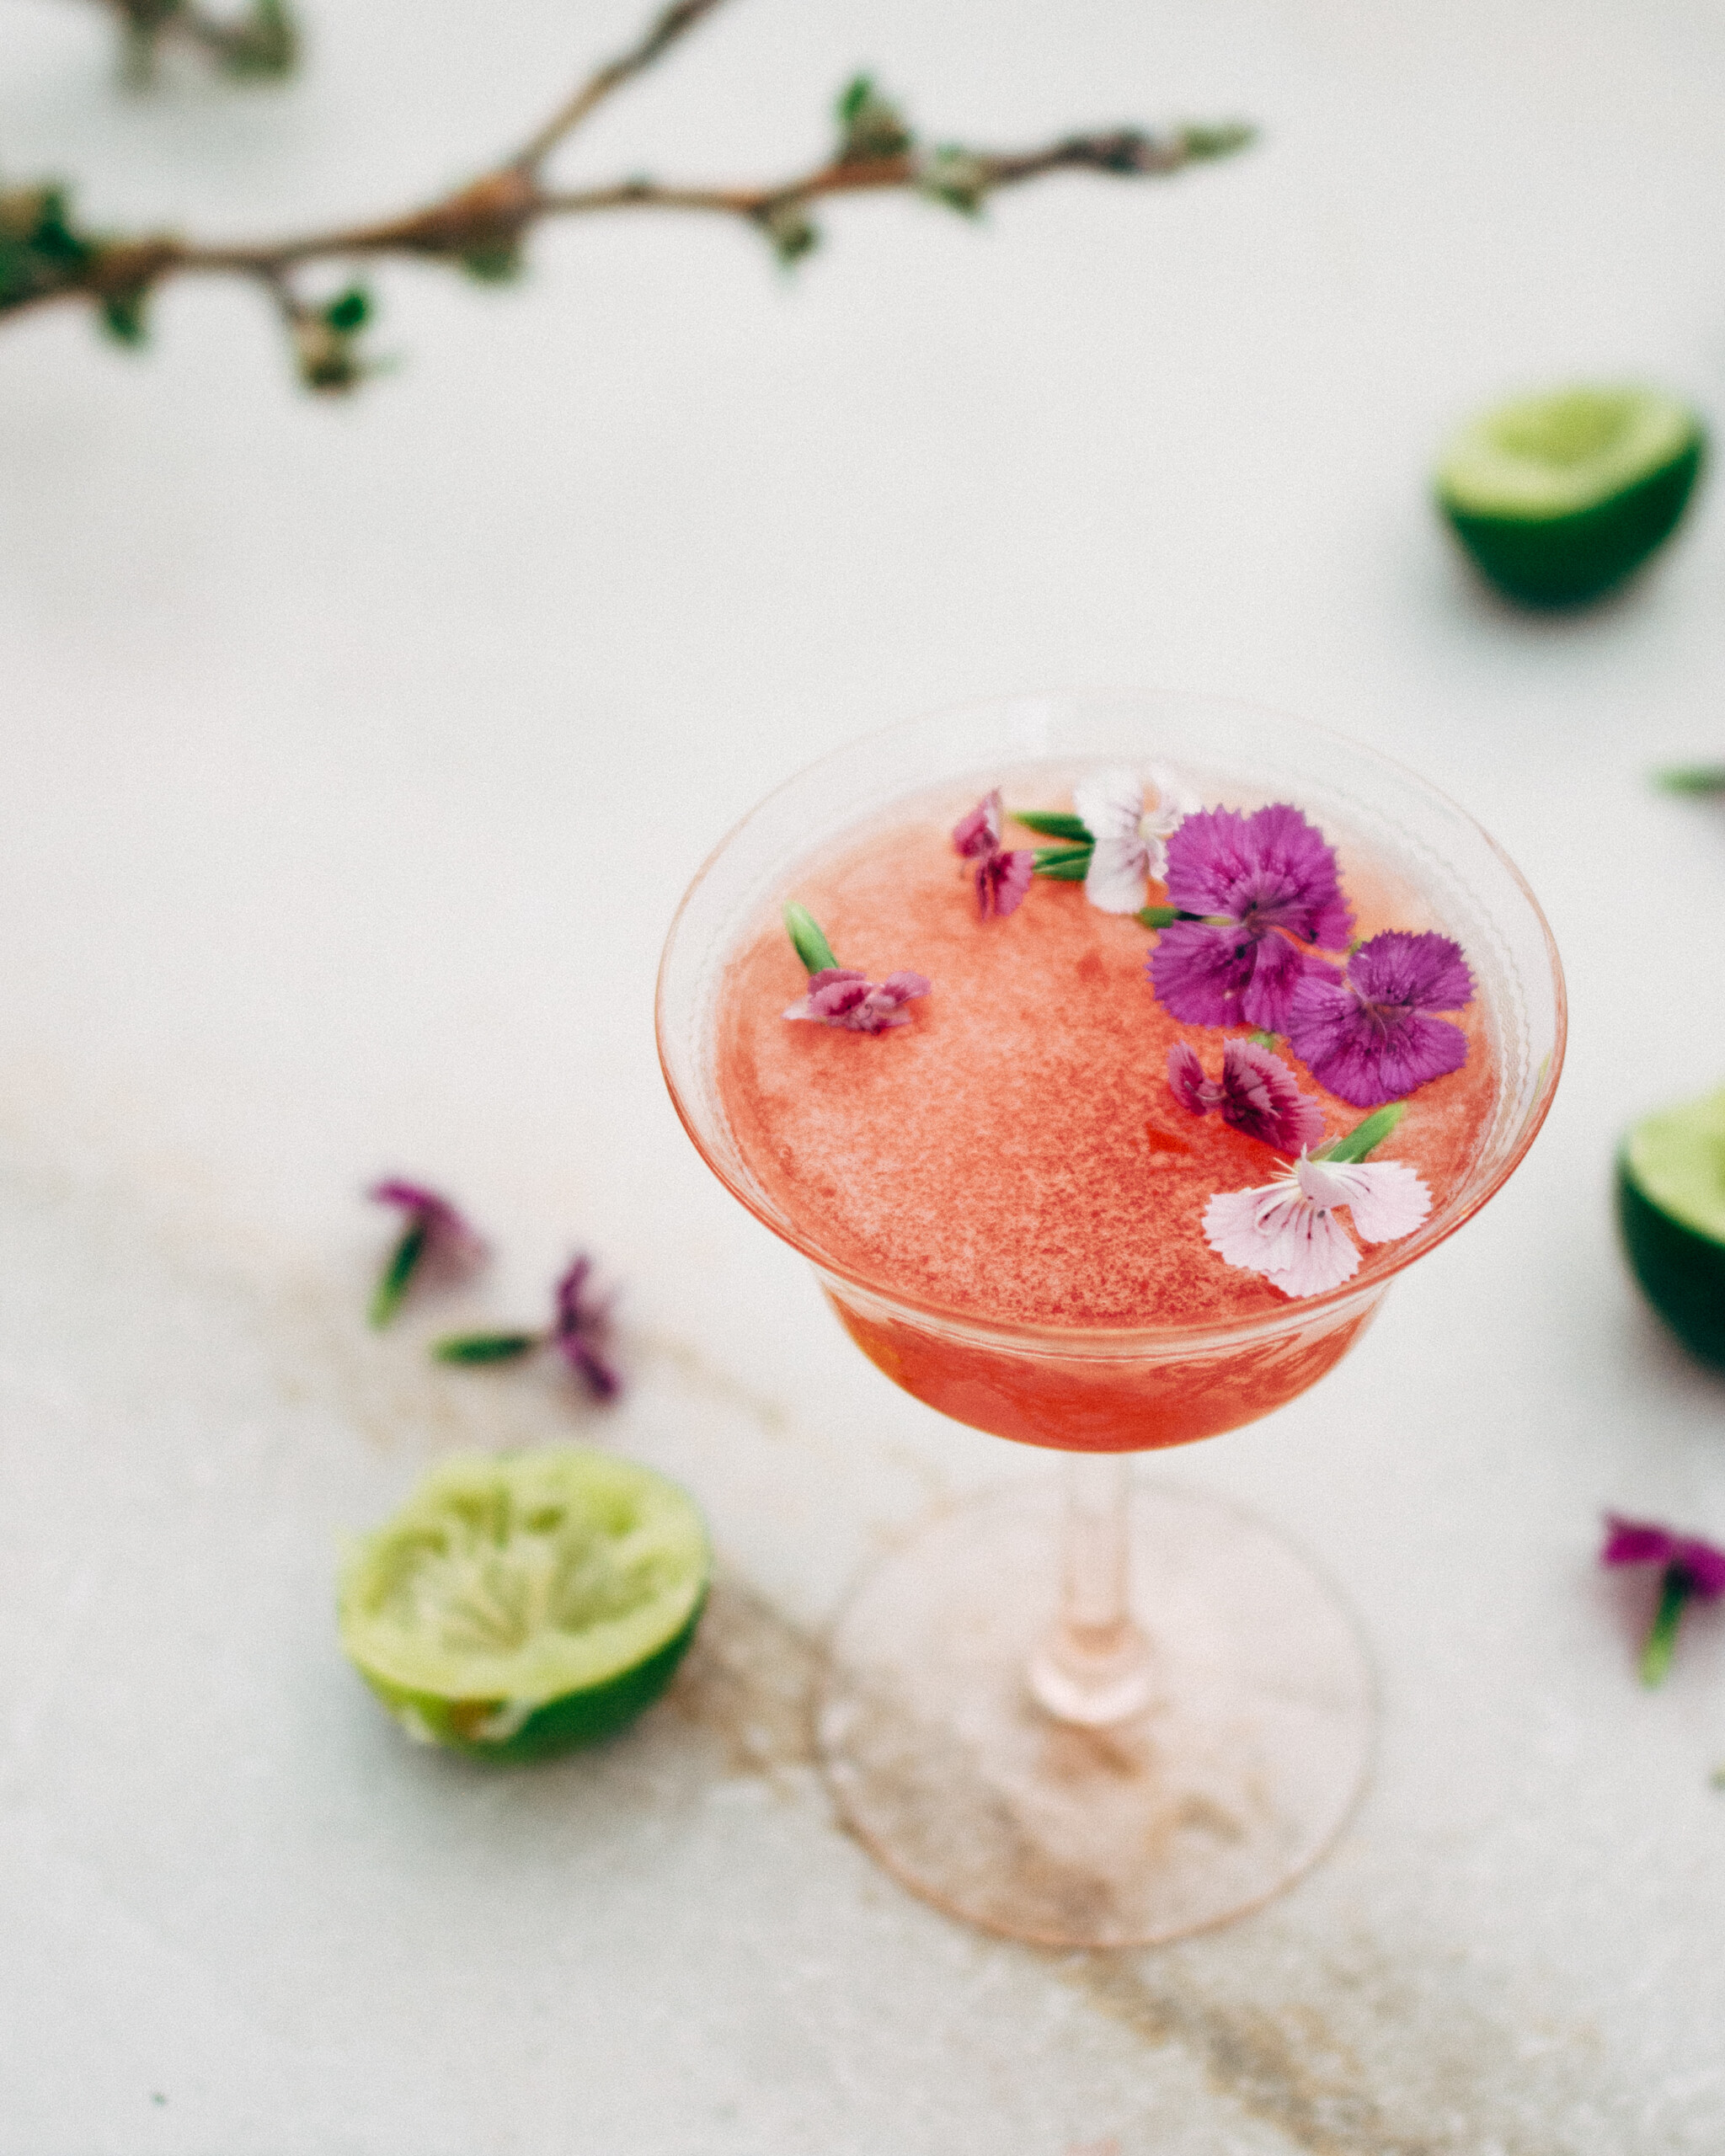 A side-view of a bright pink cocktail in a pale-pink cocktail glass, with edible purple flowers scattered on the drink's surface. There are freshly squeezed limes and scattered flowers in the background.